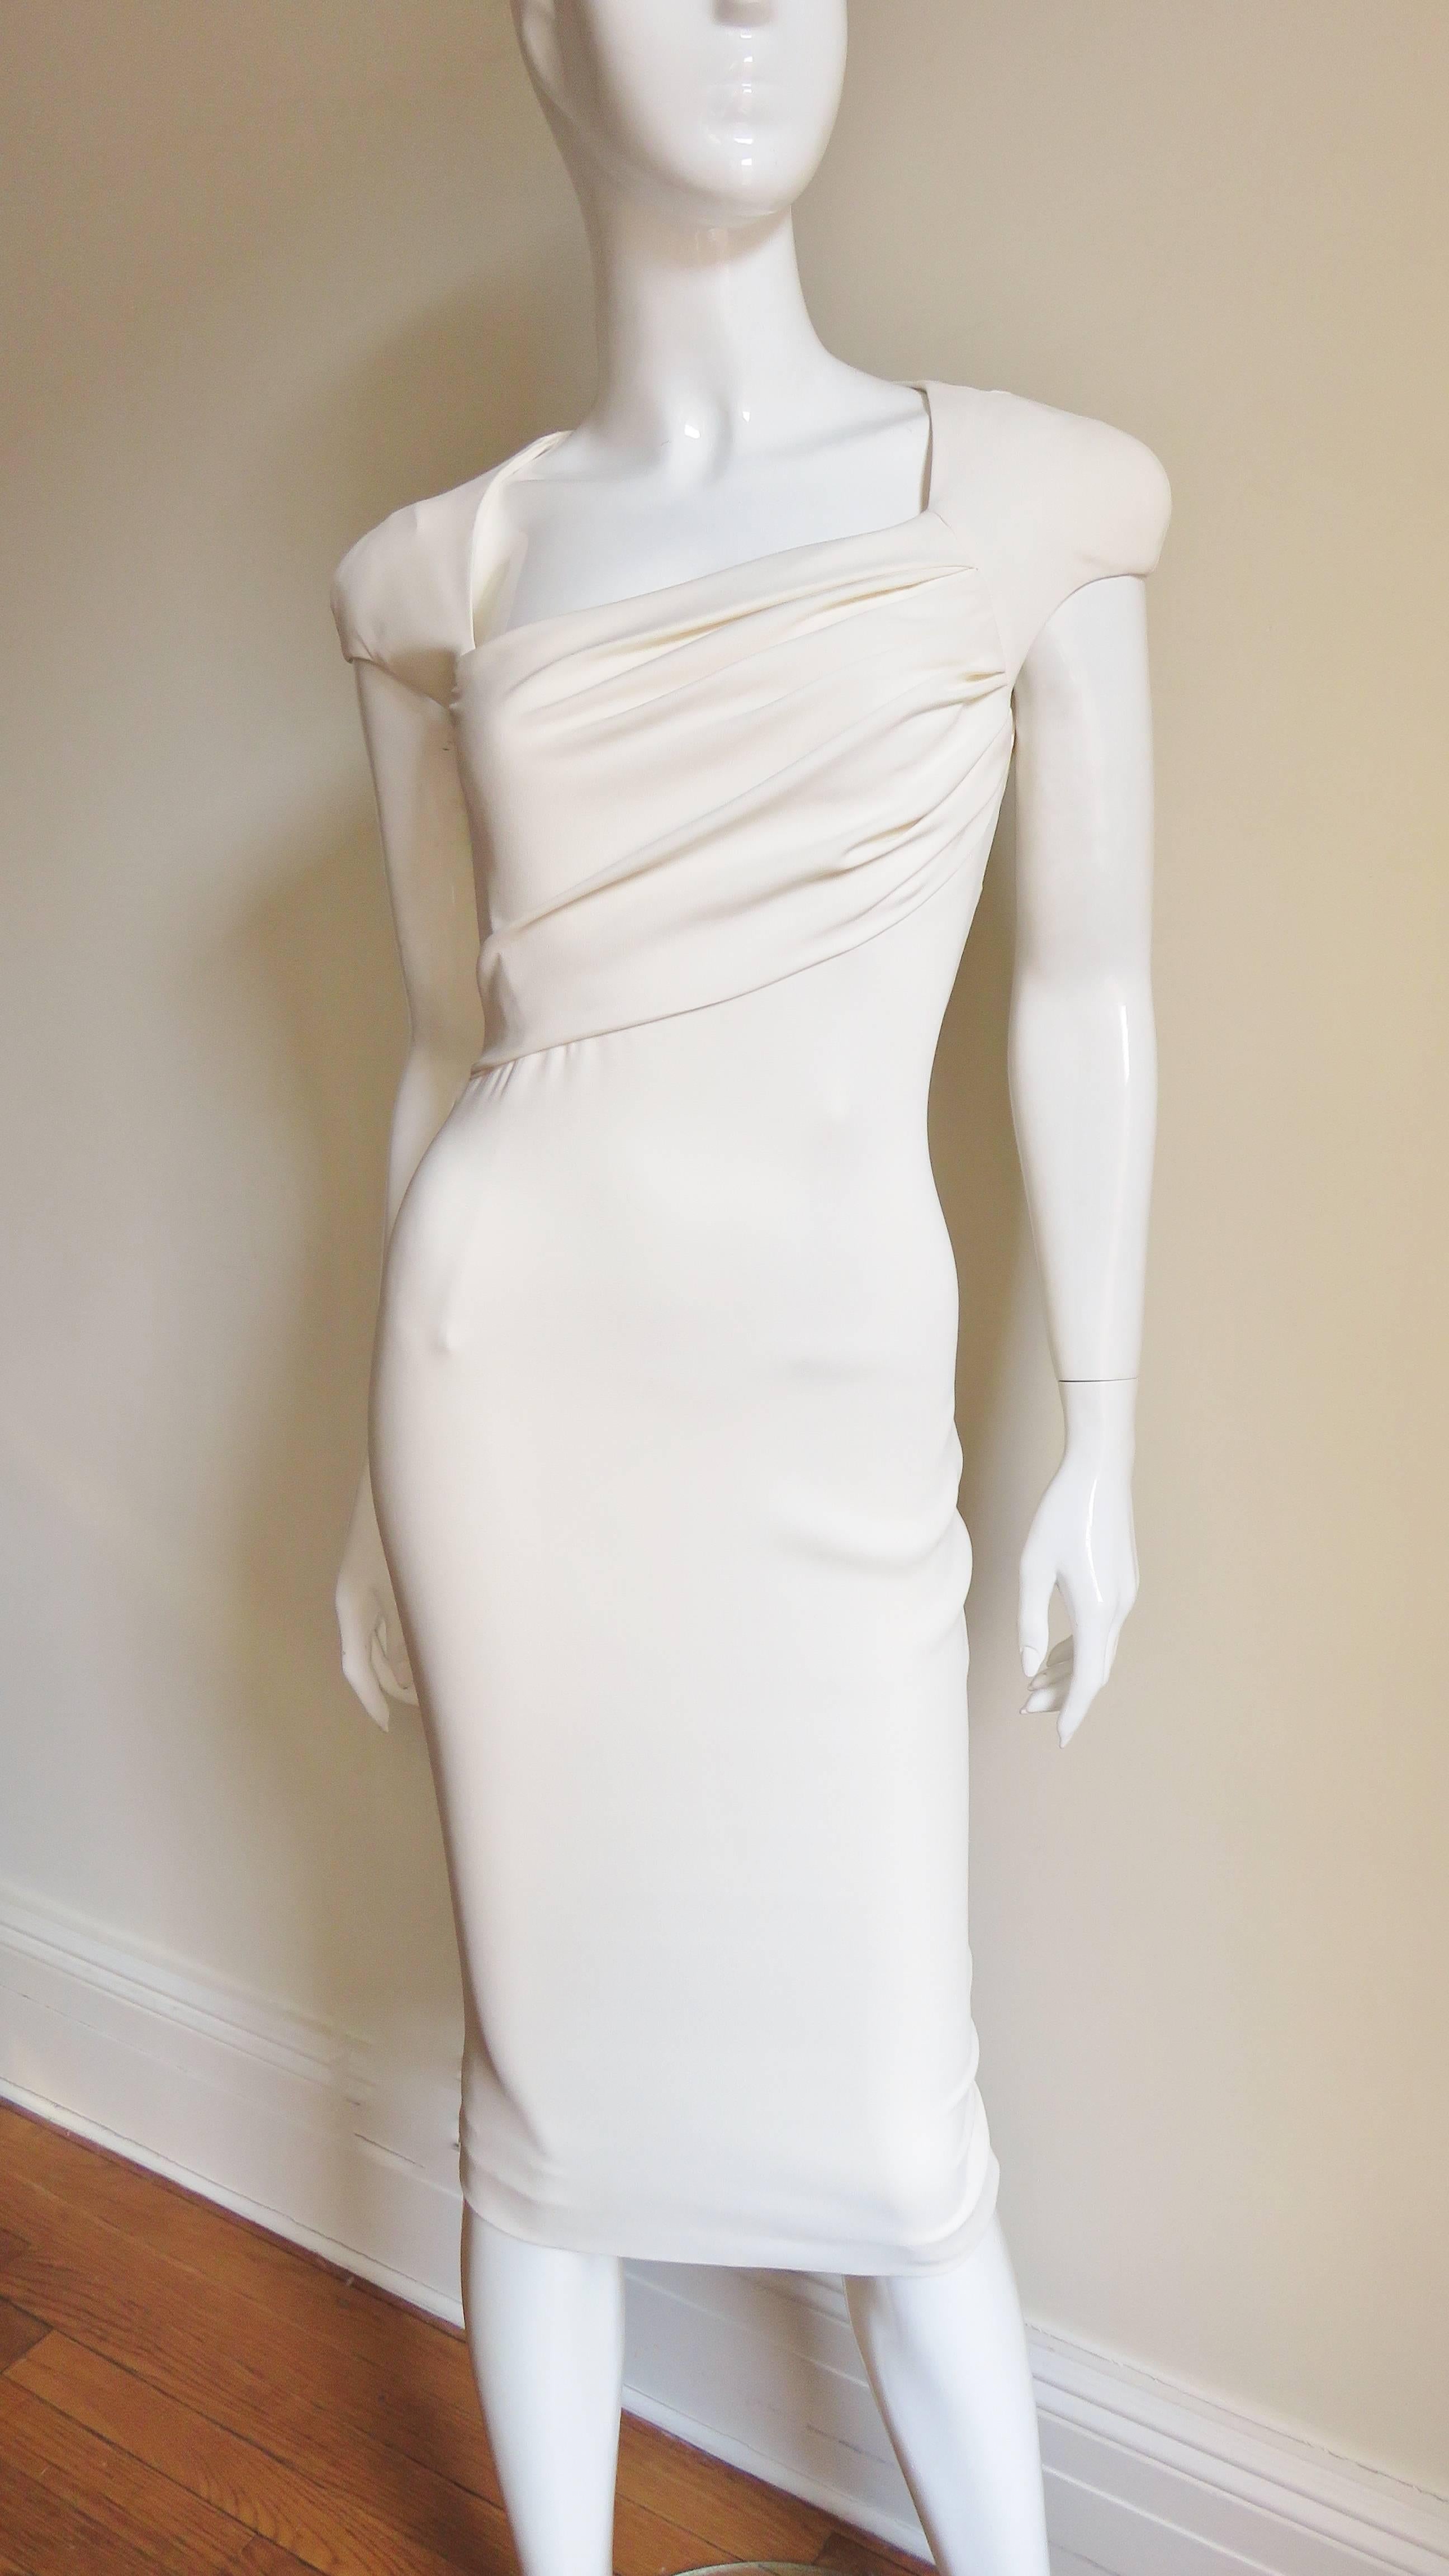 An incredible iconic set from Tom Ford 2012 collection in off white silk jersey, an identical but shorter and rarer version of what Gwyneth Paltrow to the Oscars that year.  It consists of a body conscious dress with an asymmetrical neckline and